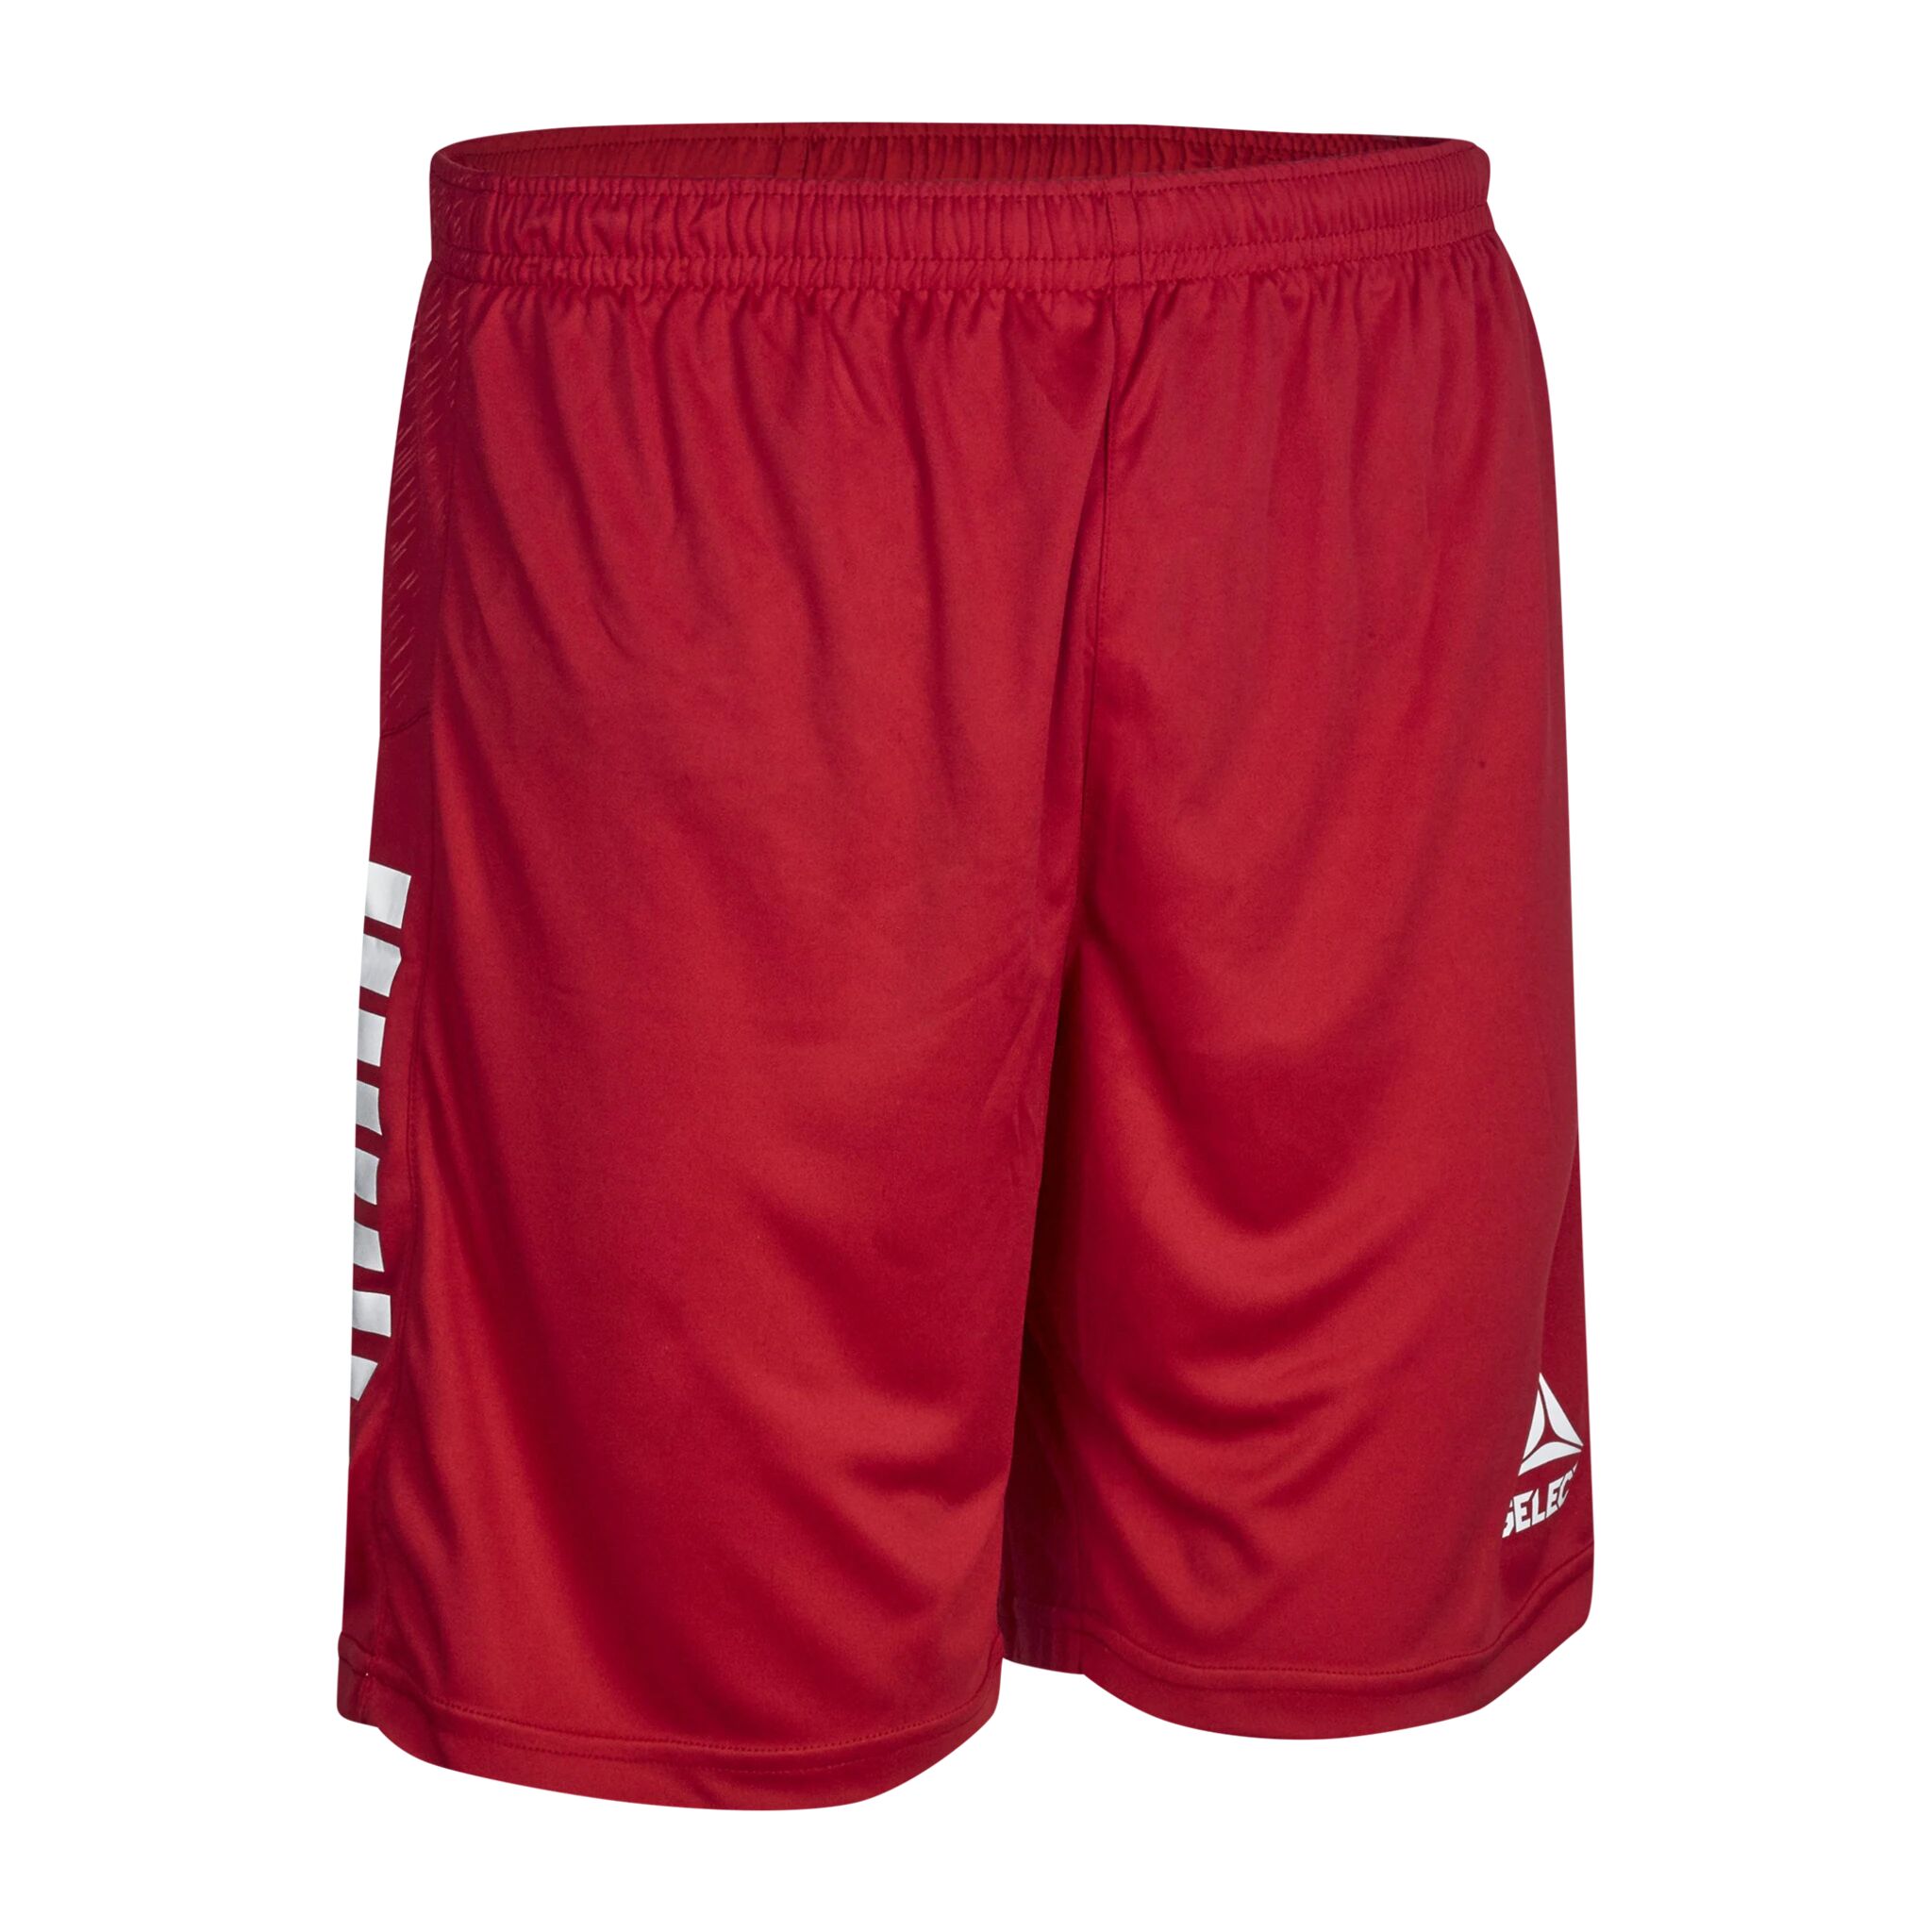 Select Player shorts Spain, shorts unisex 6Y RED